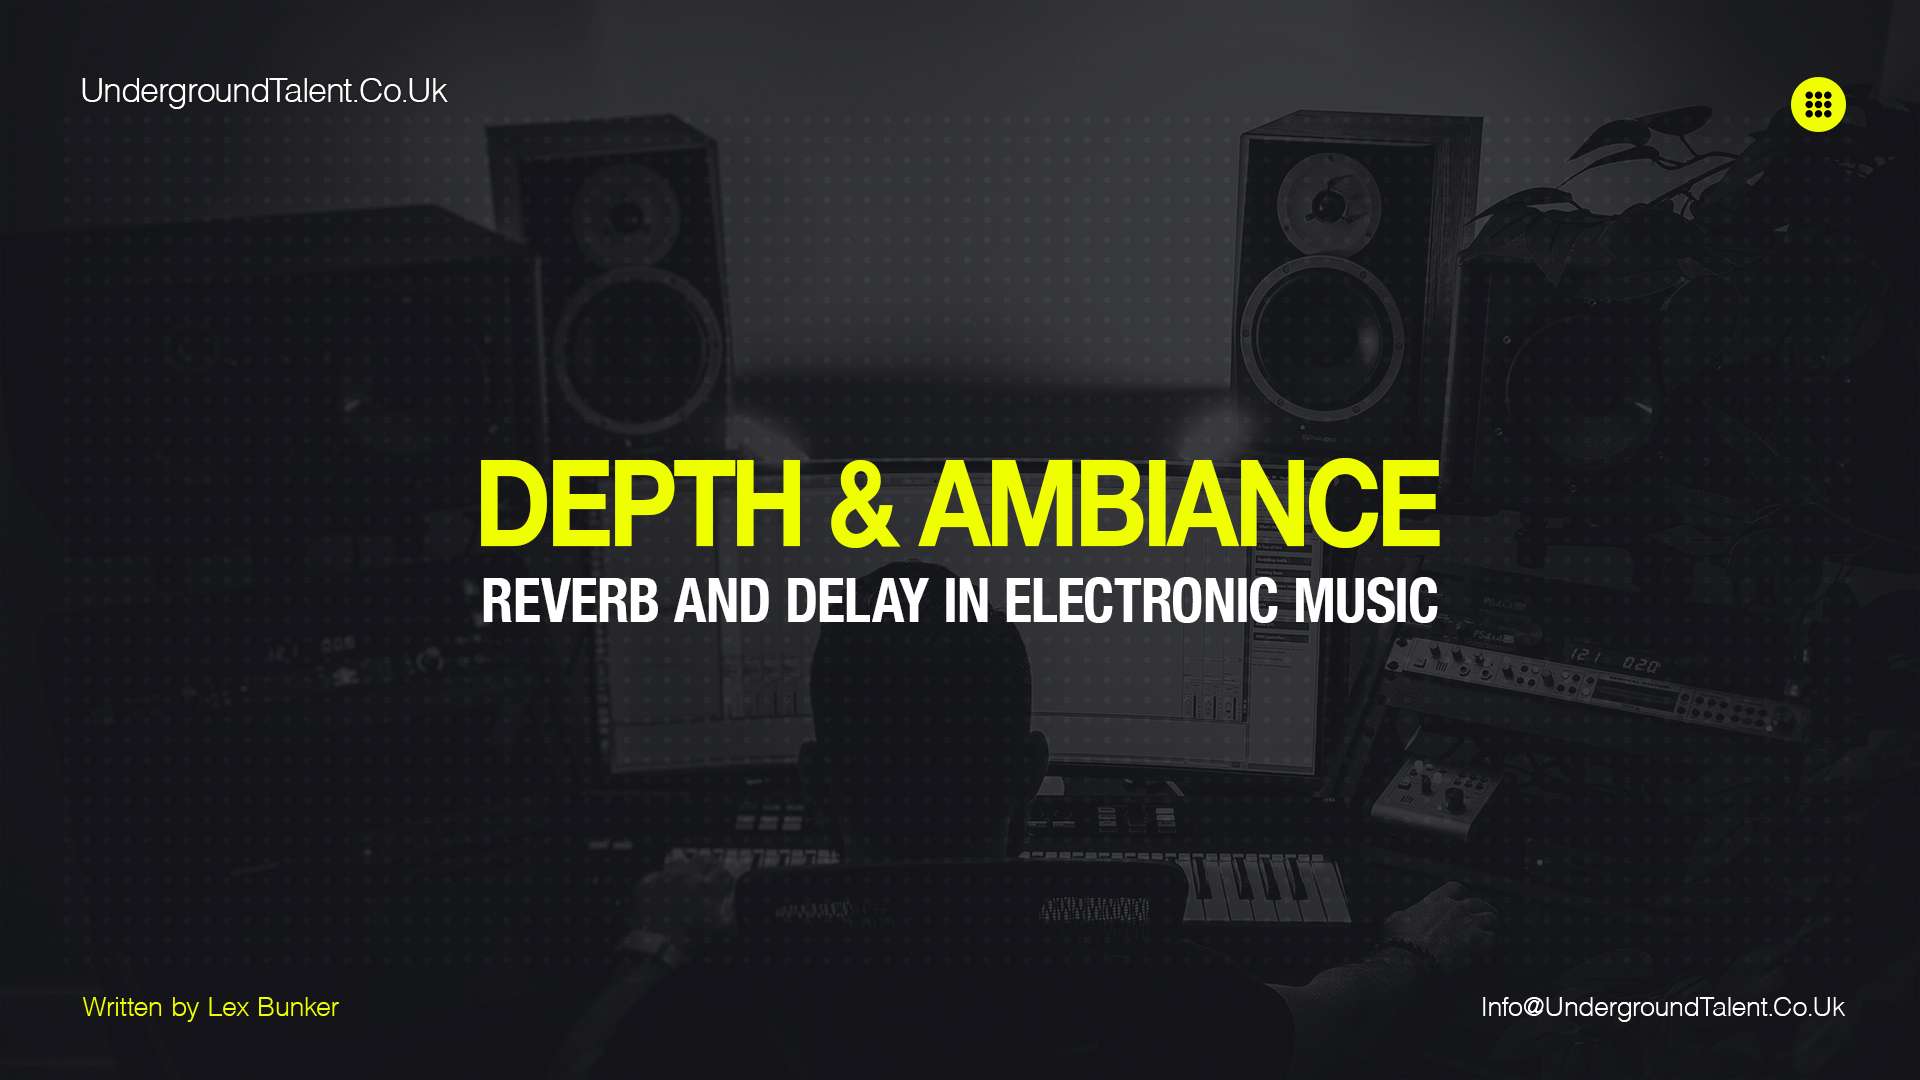 Creating Depth and Ambiance: Reverb & Delay in Electronic Music